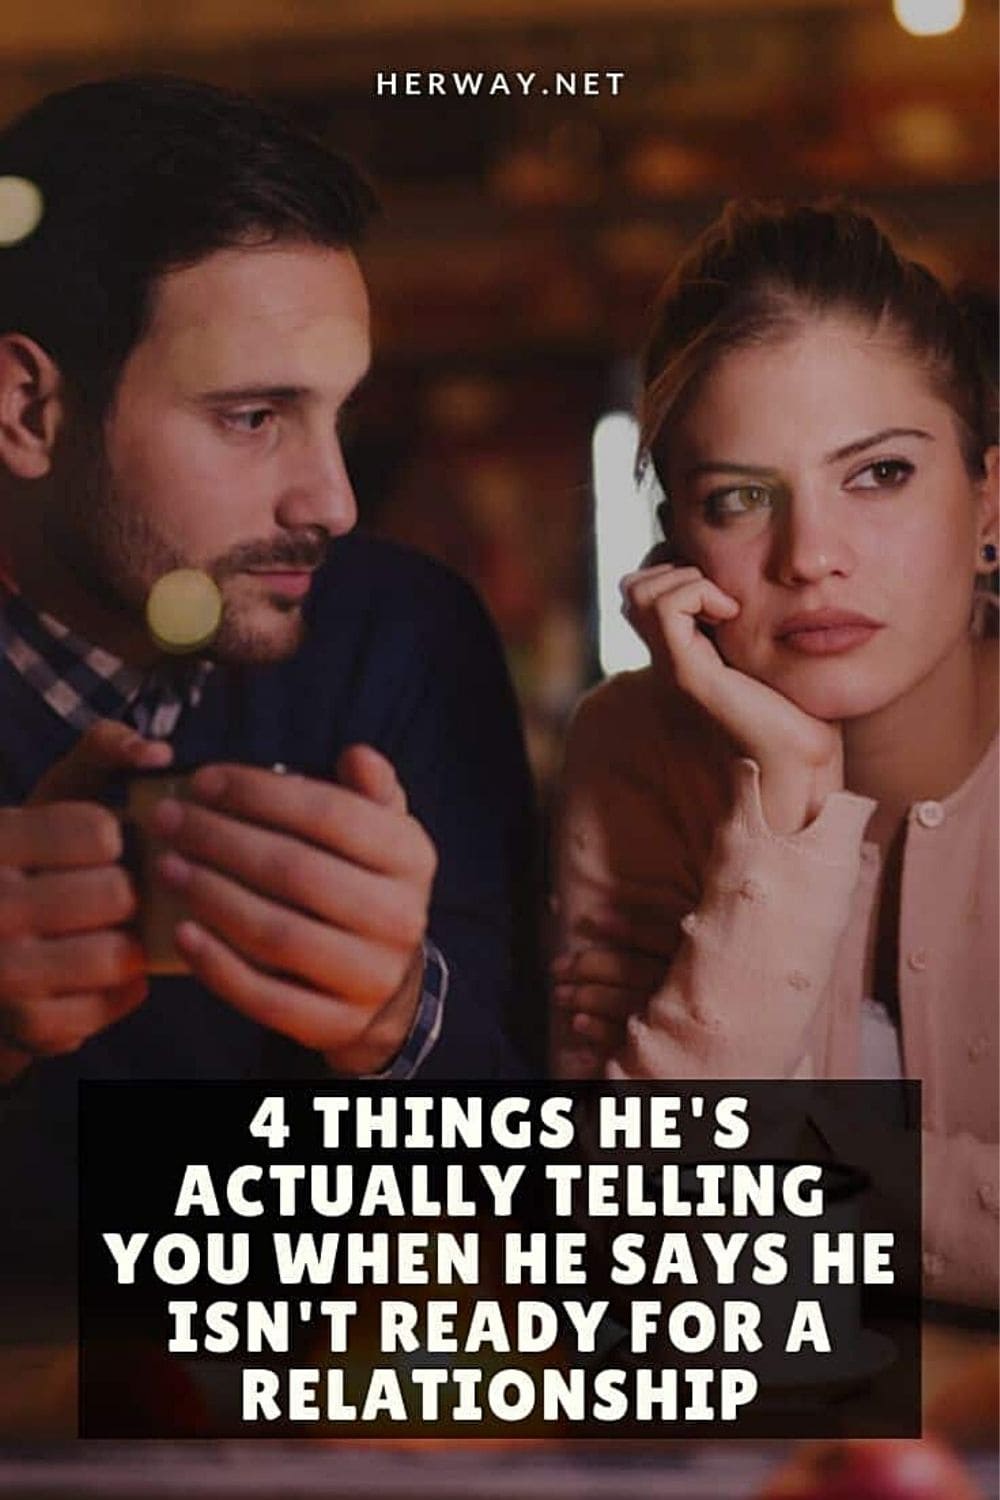 4 Things He's Actually Telling You When He Says He Isn't Ready For A Relationship